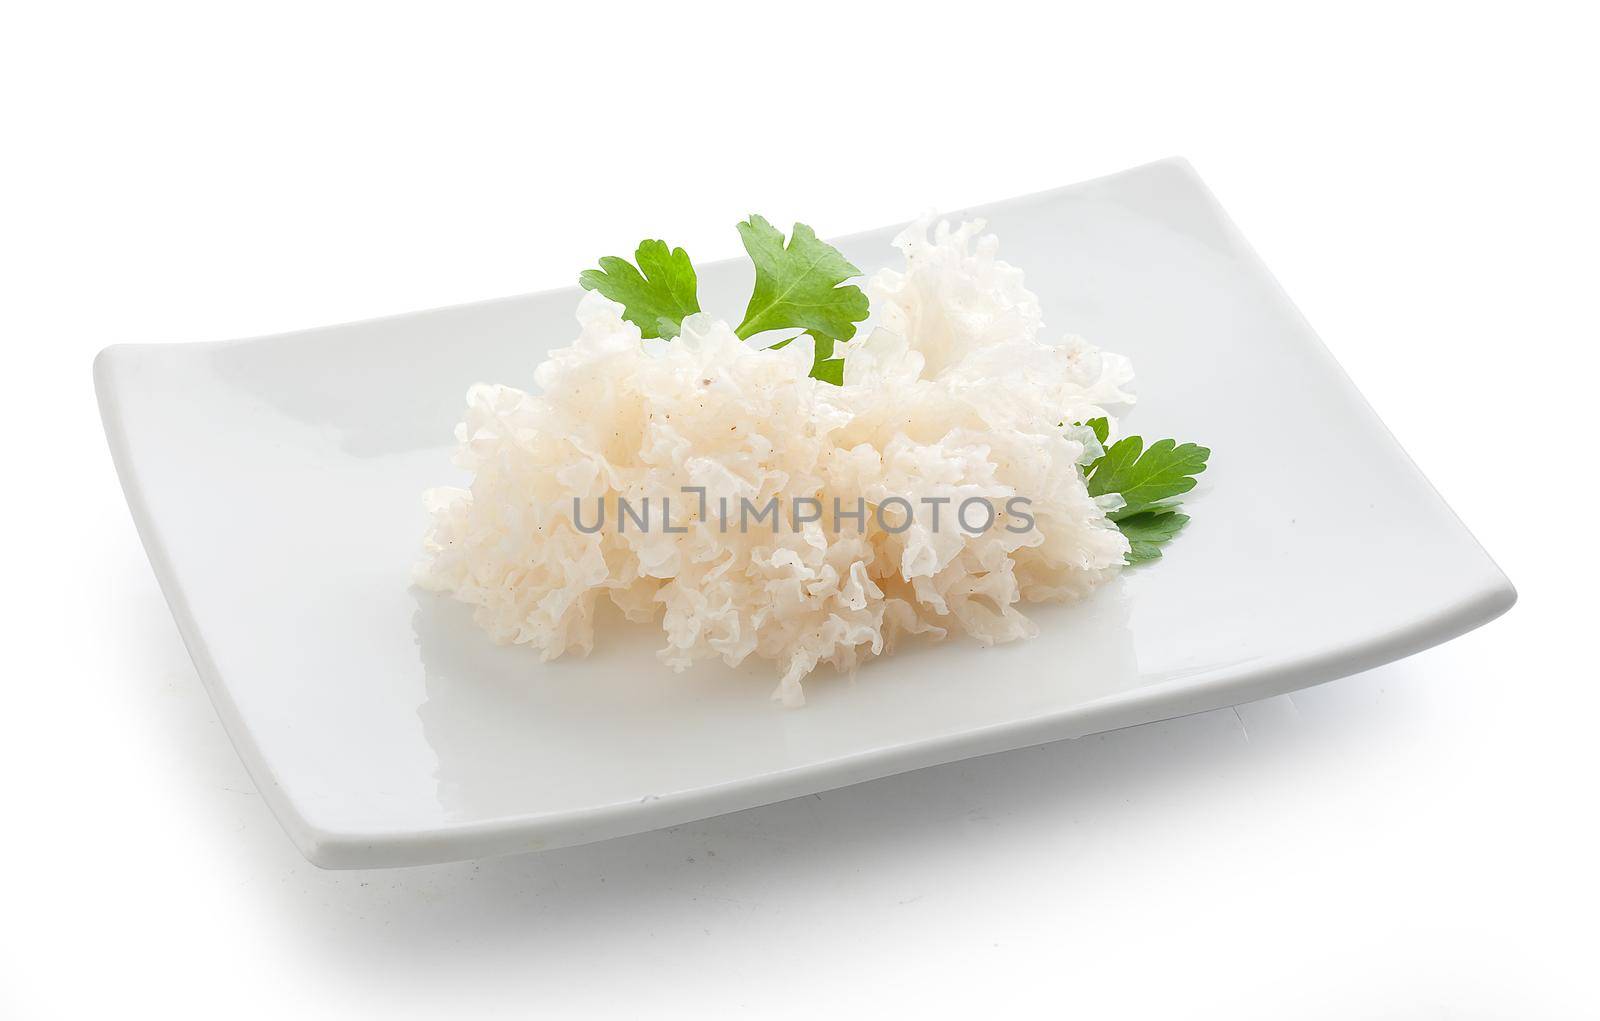 Marinated Korean-style snow fungus on the white plate